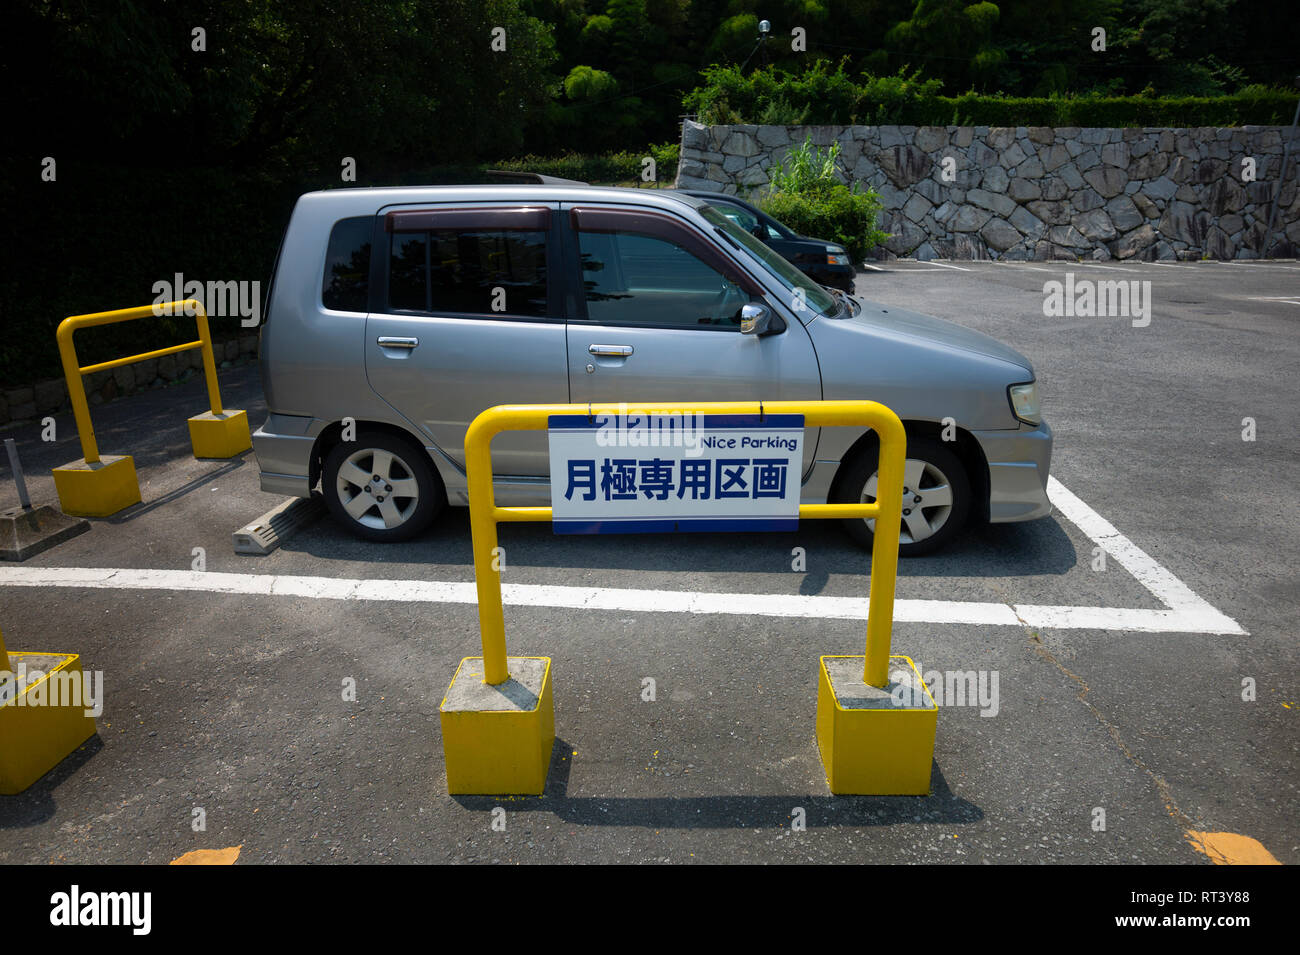 A car parking space in Japan Stock Photo